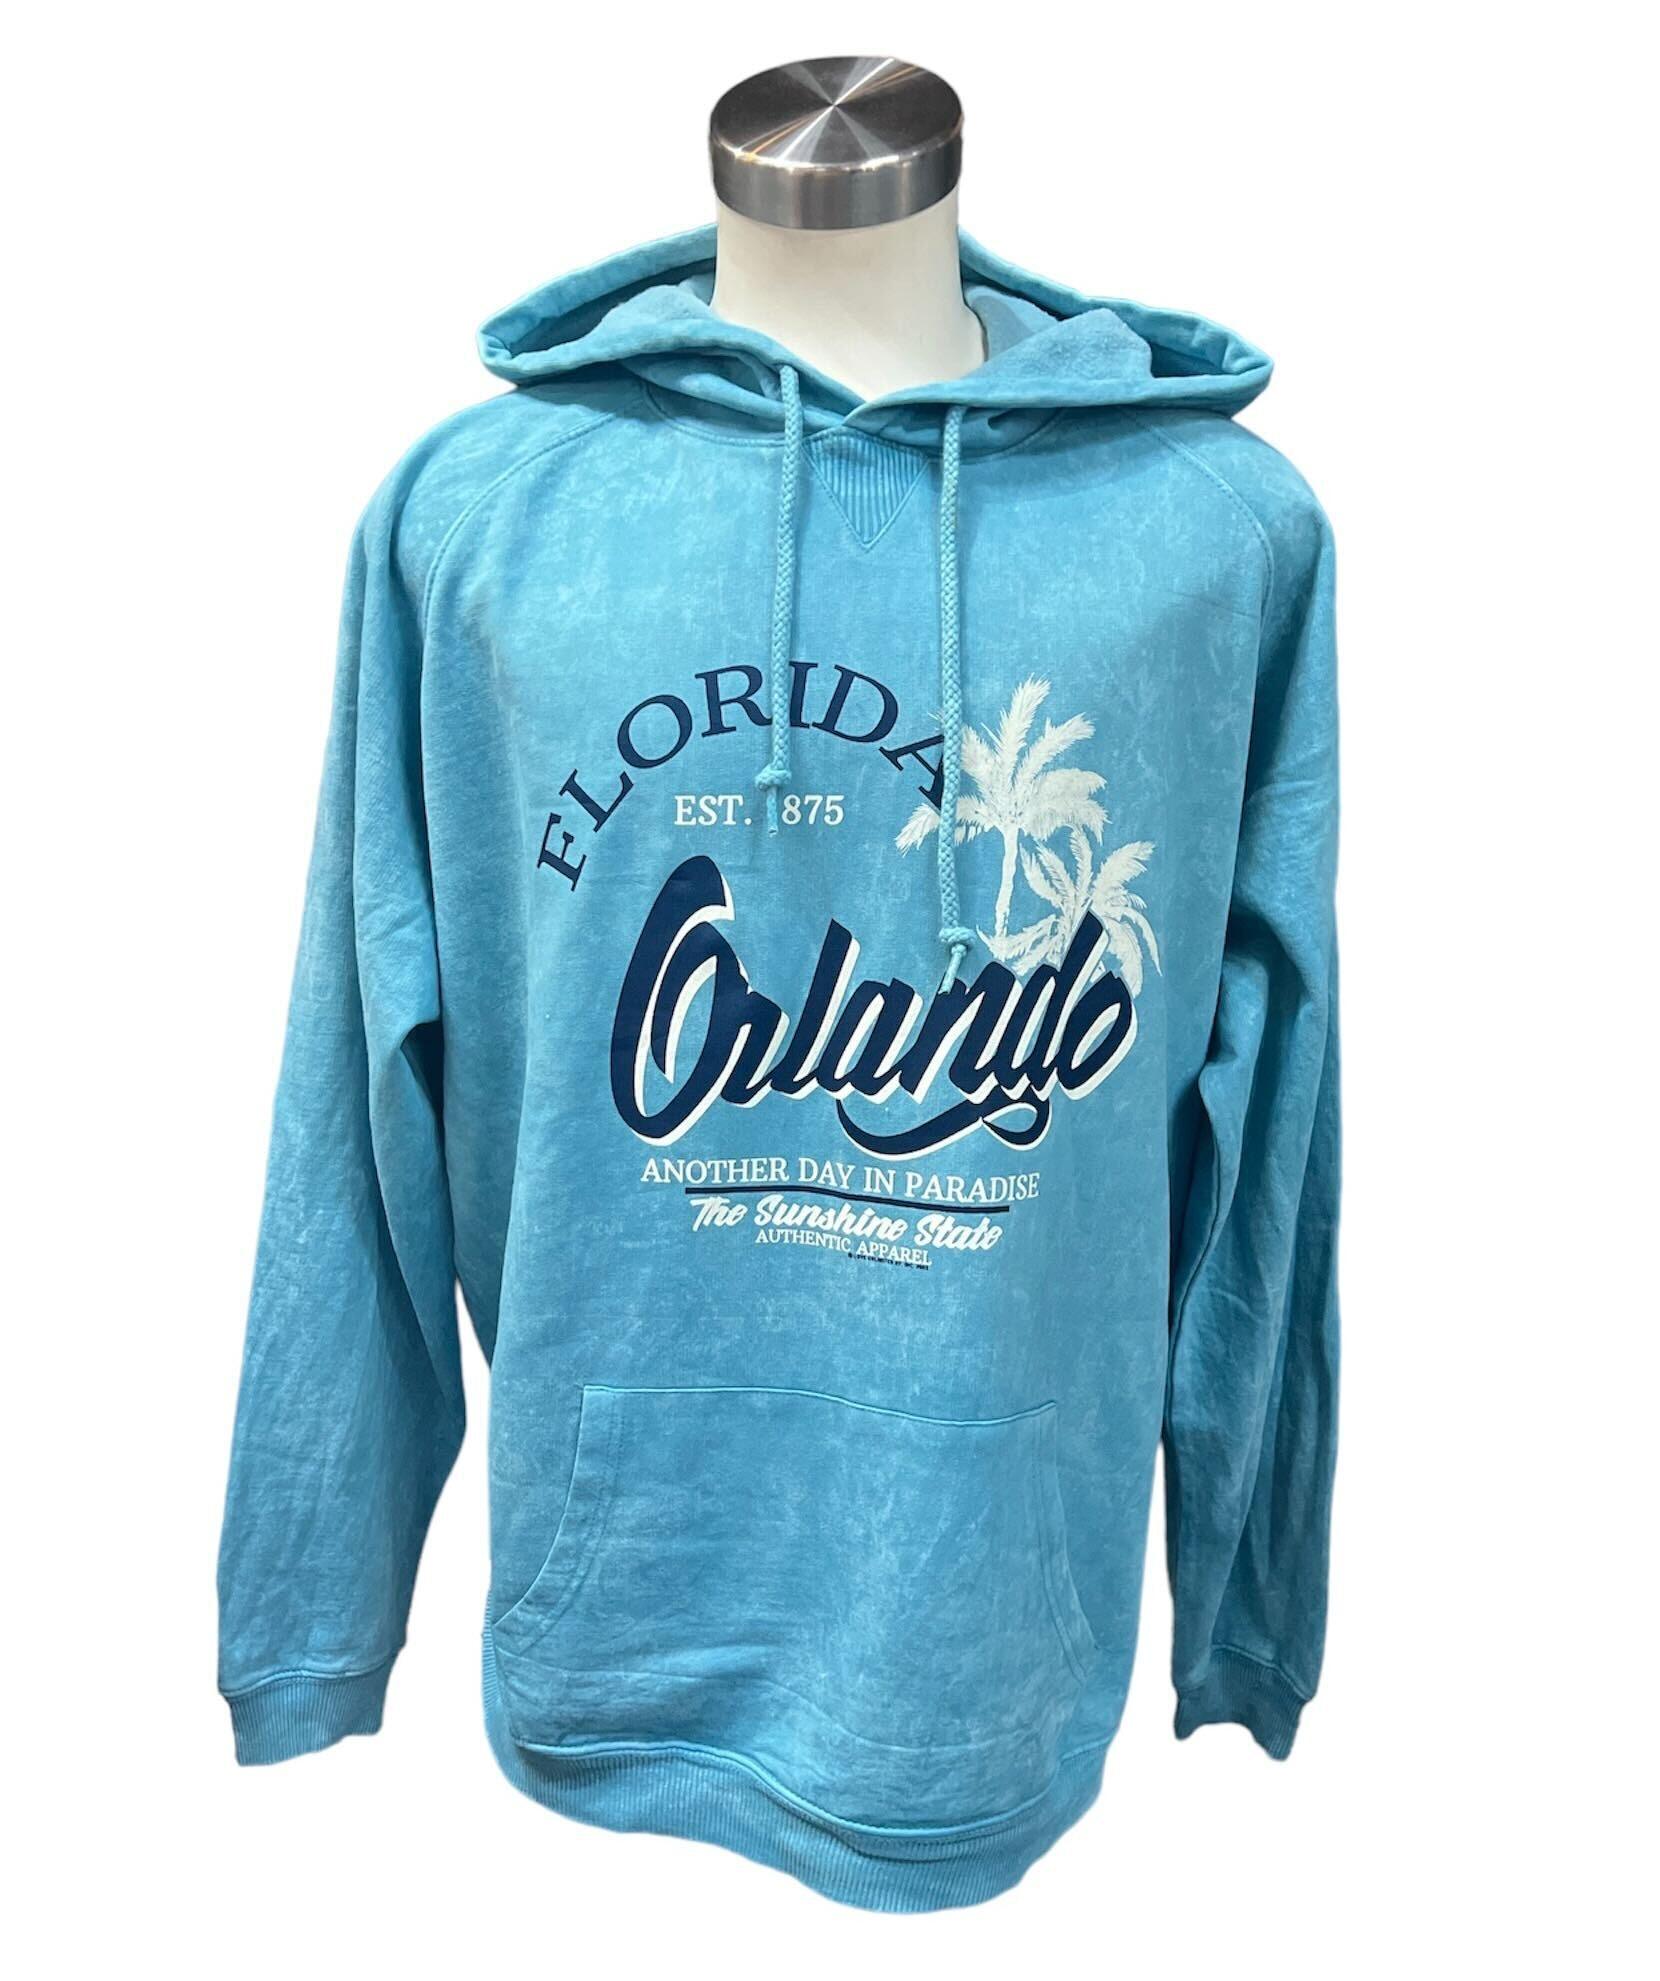 Orlando Florida Another Day in Paradise Oceana Pullover Hoodie